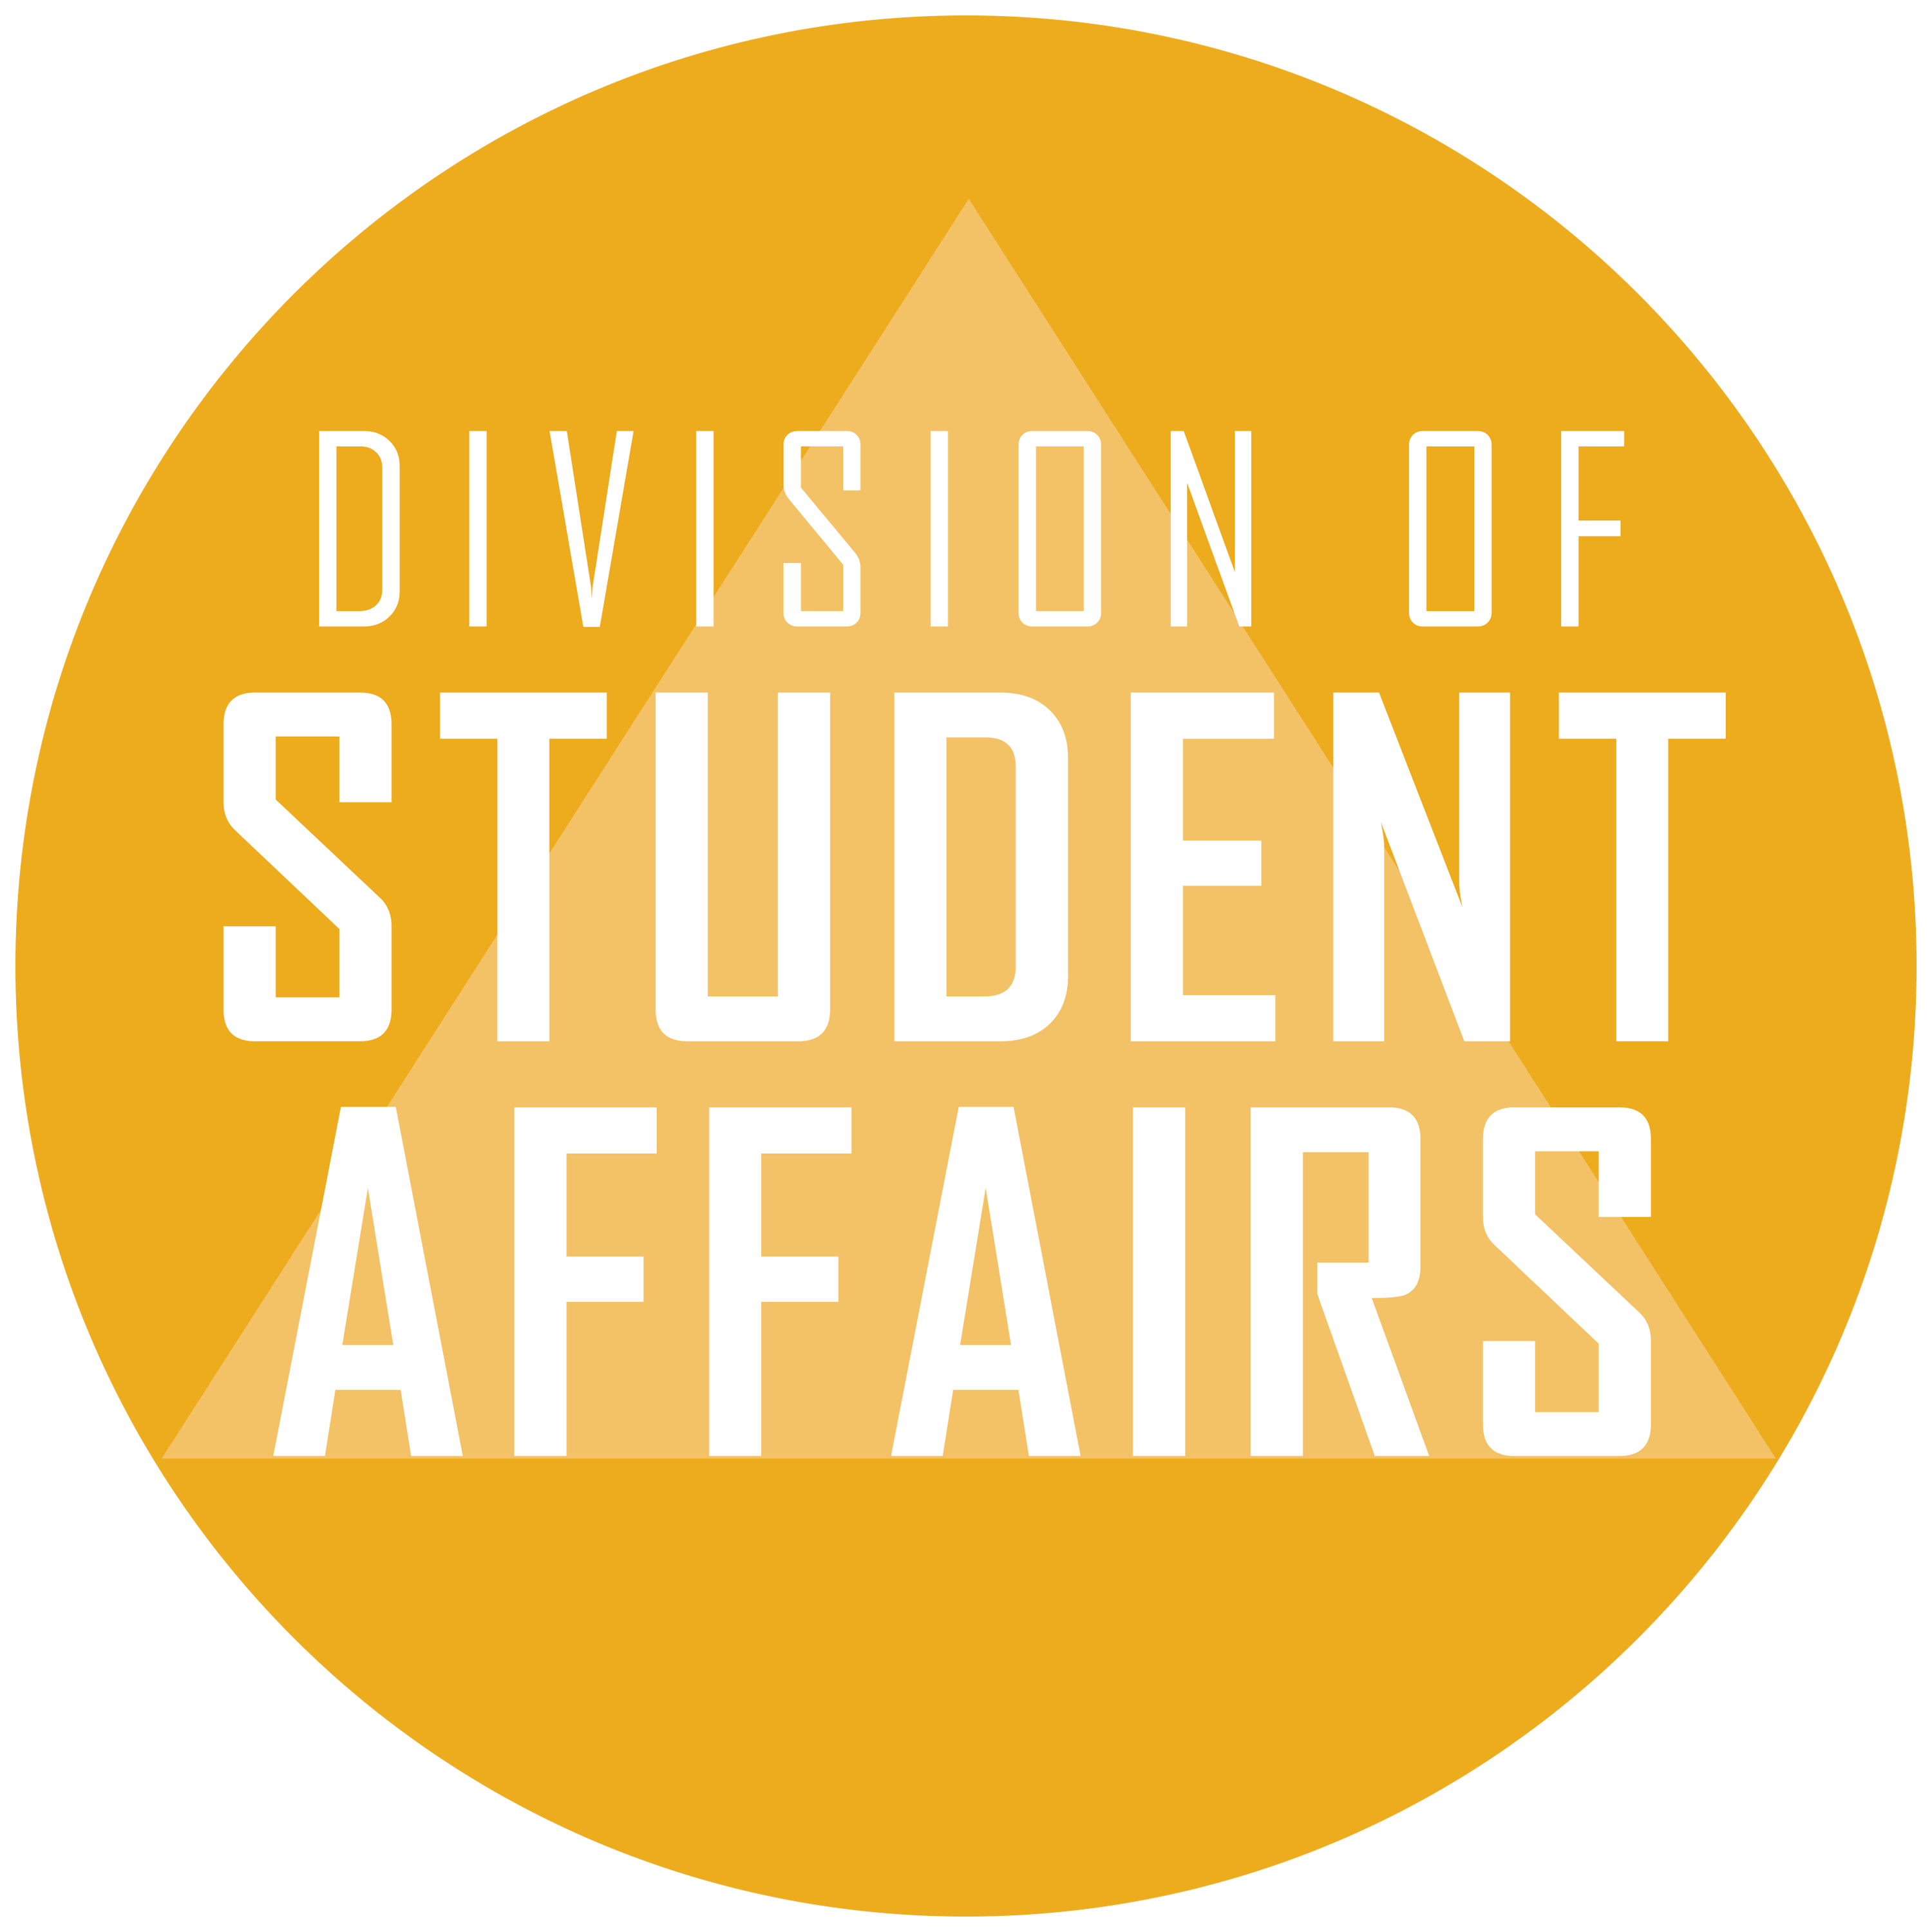 Division of Student Affairs text within a gold circle with a